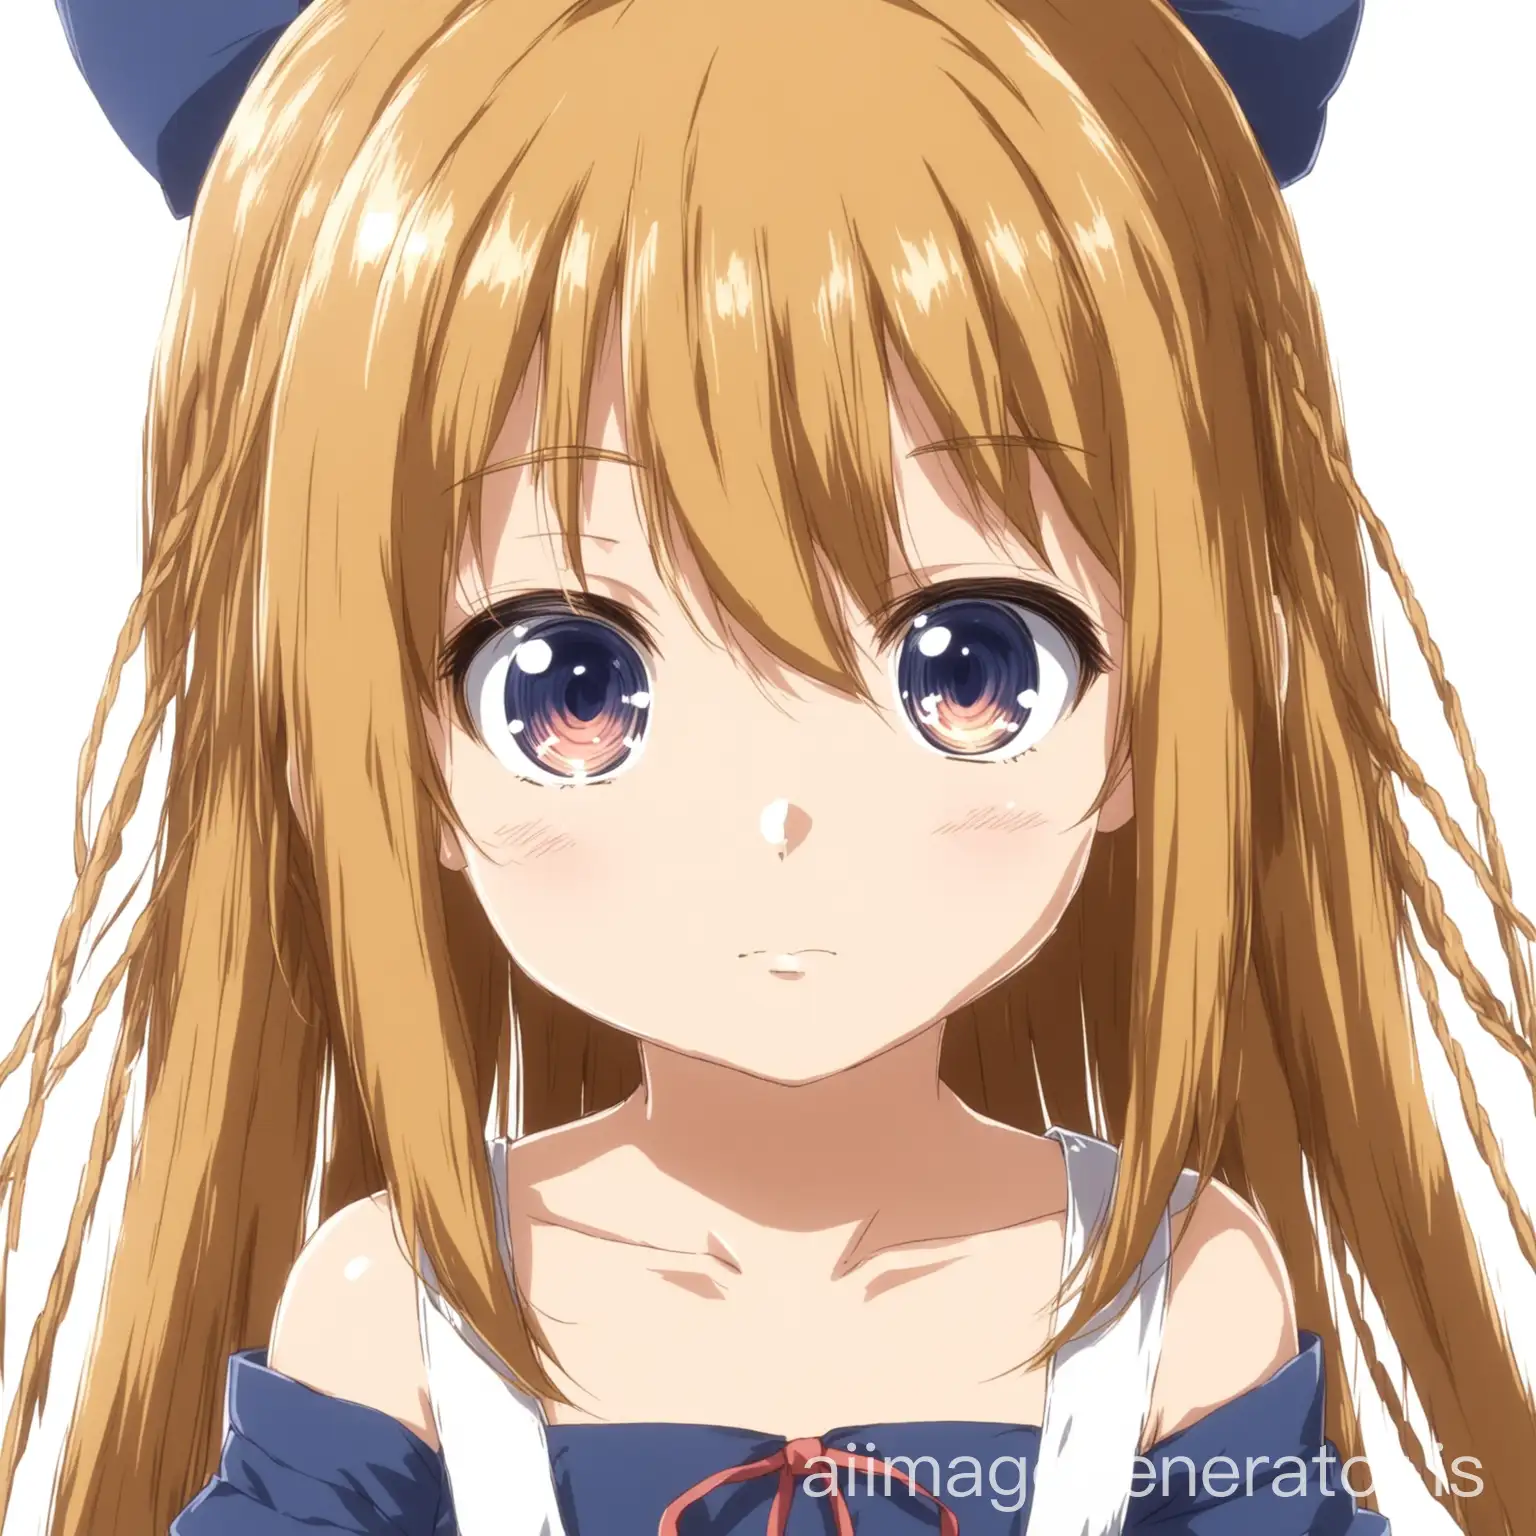 Adorable-5YearOld-Anime-Girl-with-Playful-Expression